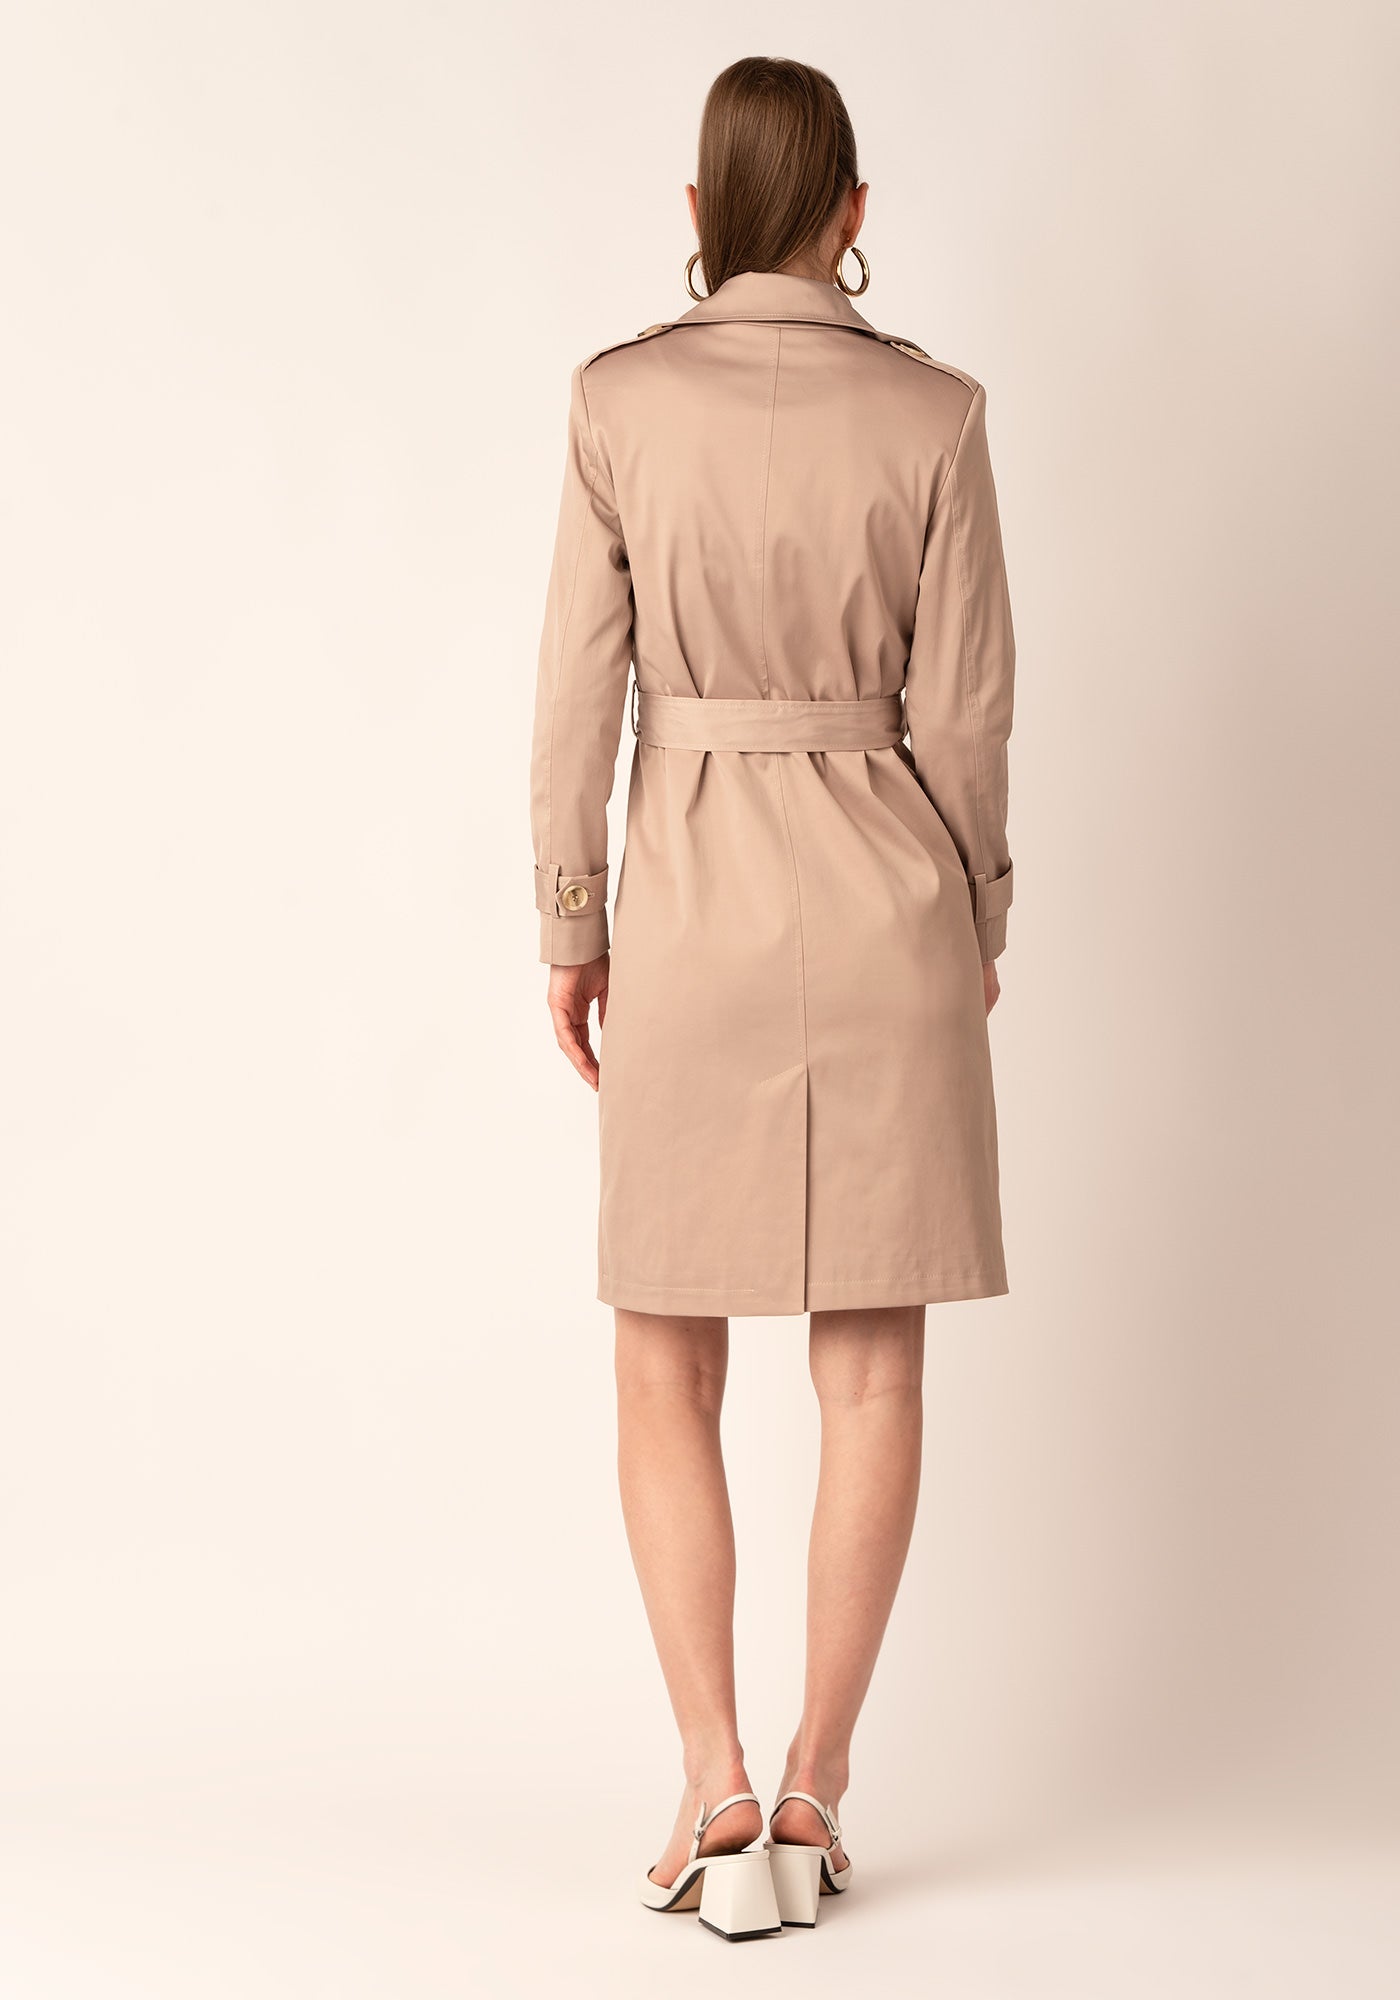 Women's Tailored Double breasted Trench coat in Beige